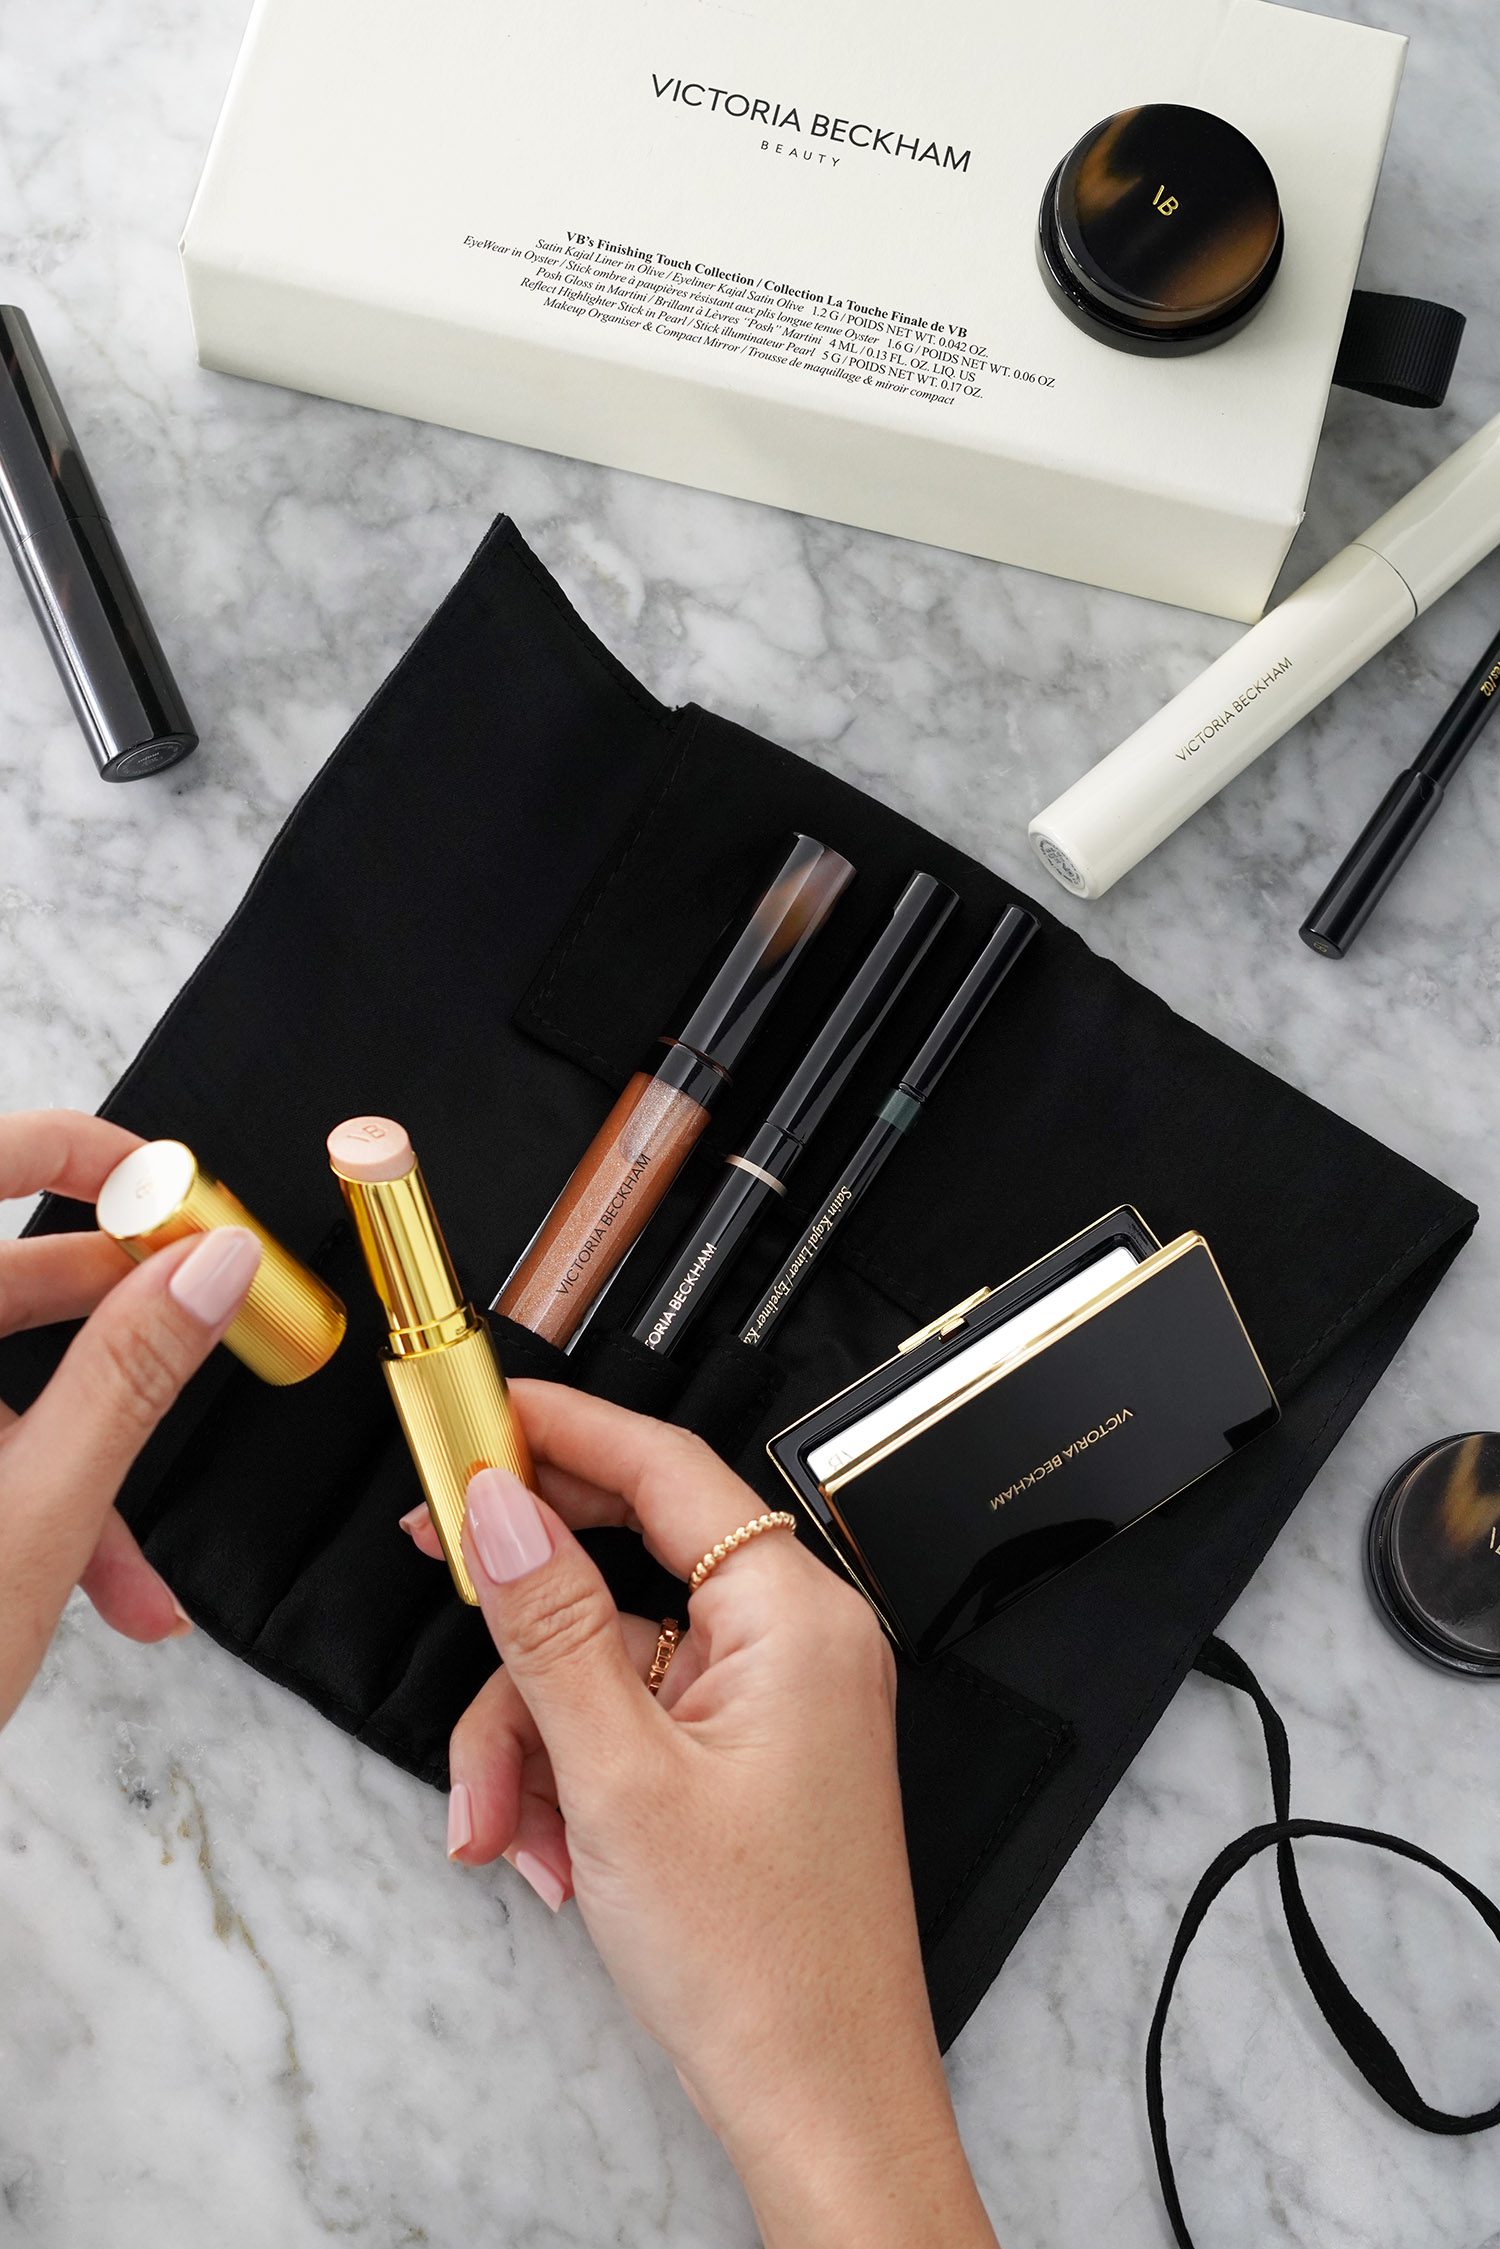 Victoria Beckham Beauty Finishing Touch Collection - The Beauty Look Book